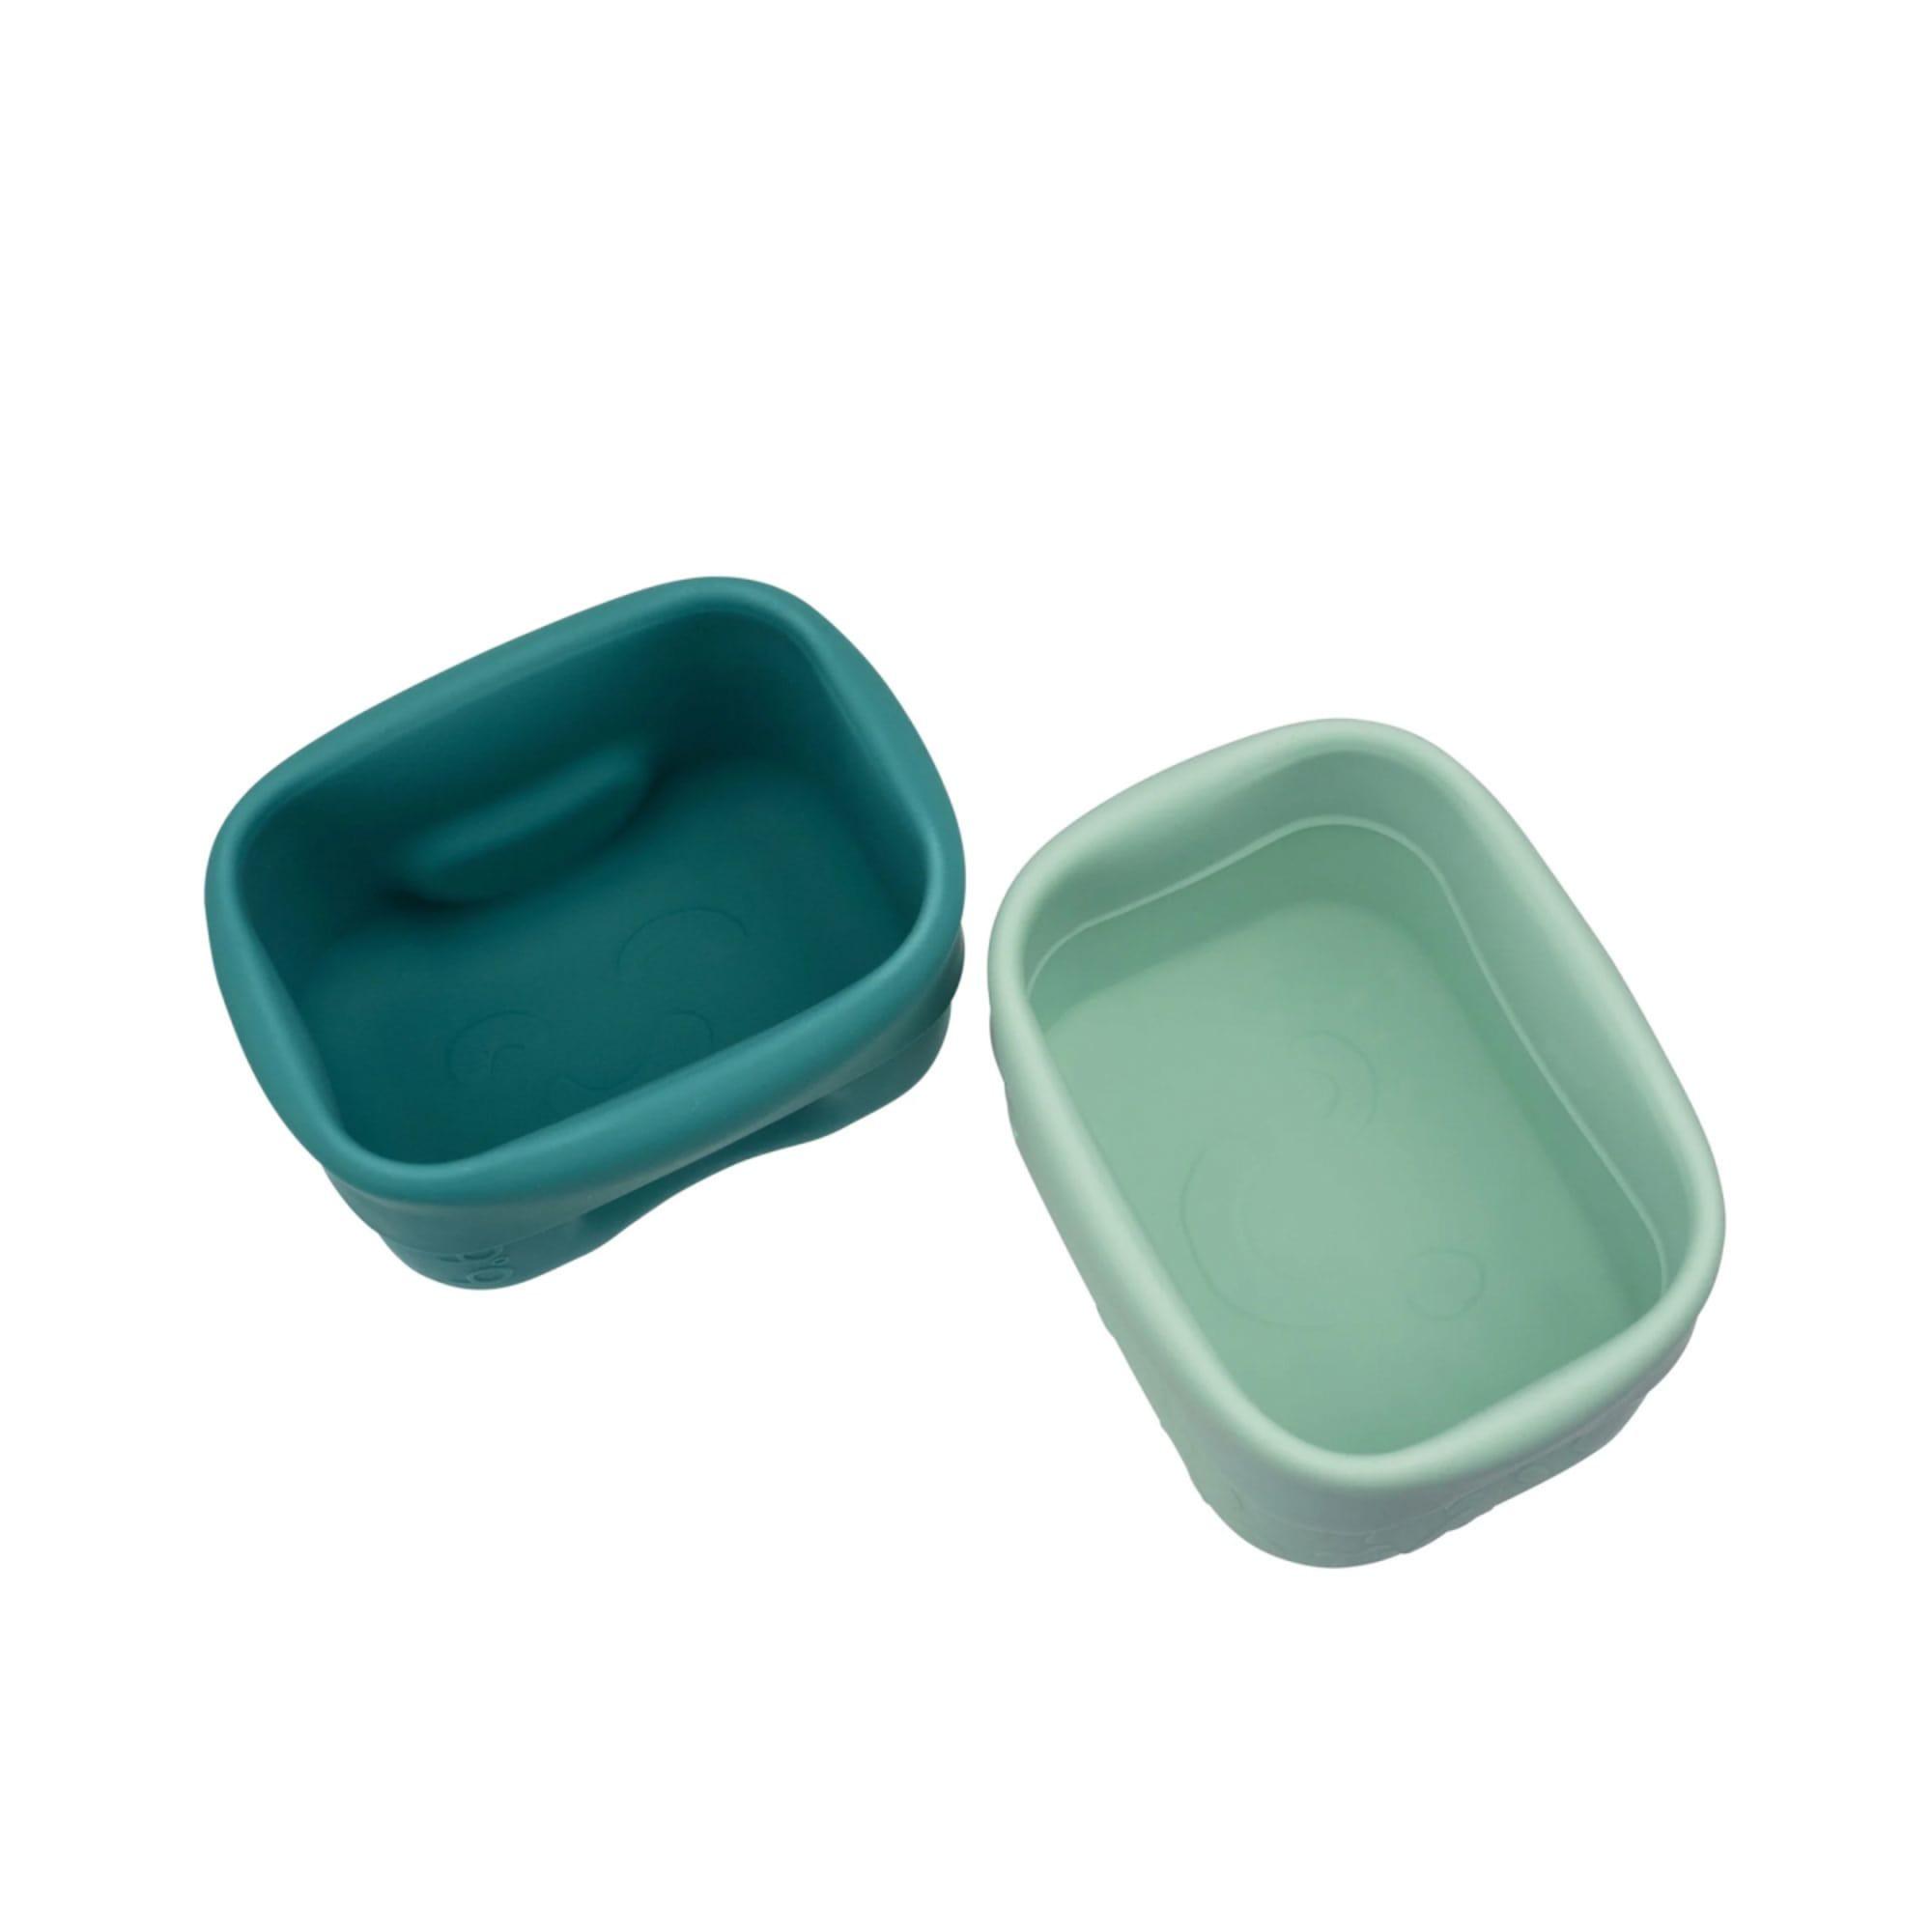 b.box Silicone Snack Cup Set of 2 Forest Image 5